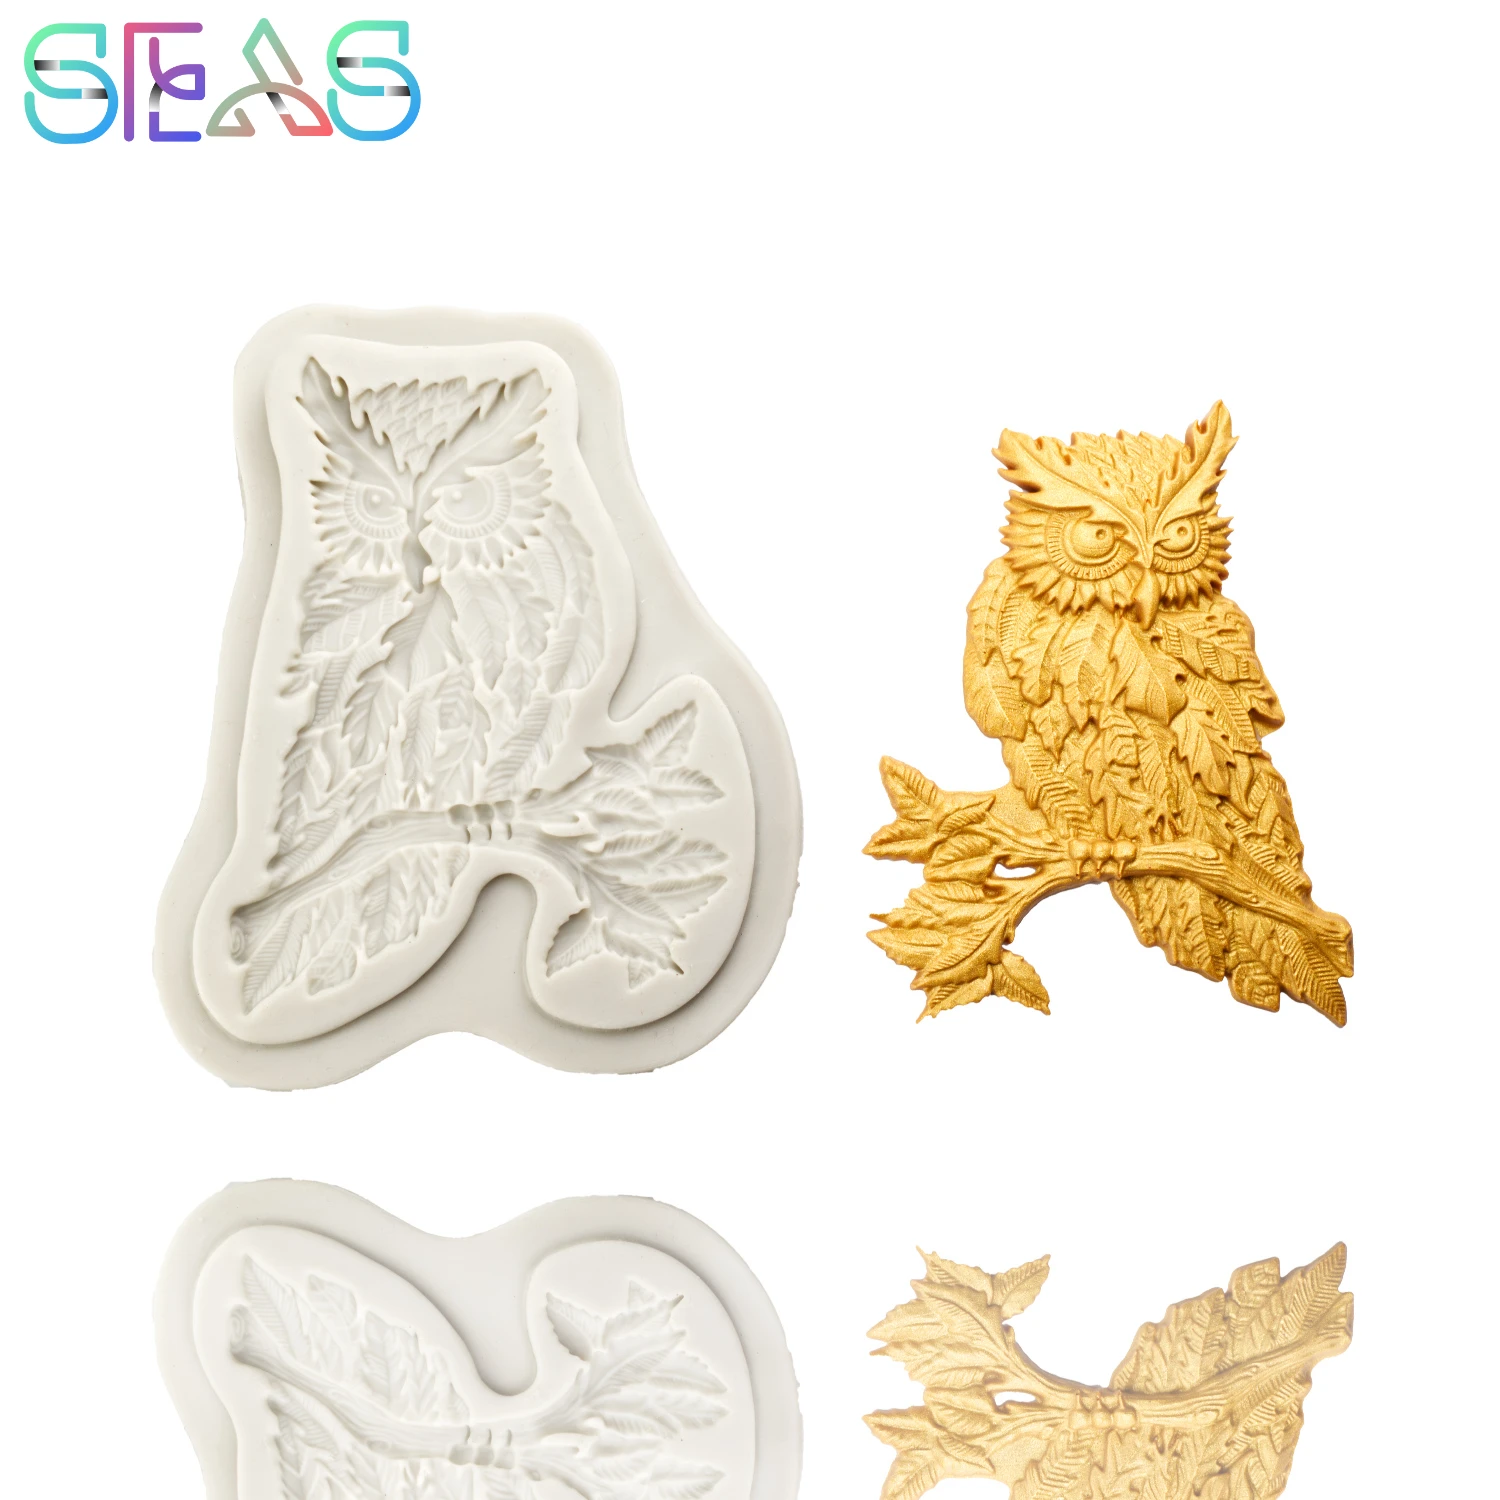 

Owl Cake Silicone Mold Handmade Chocolate Soap Mold Cake Dessert Decorative Pattern Pastry DIY Baking Gadgets new